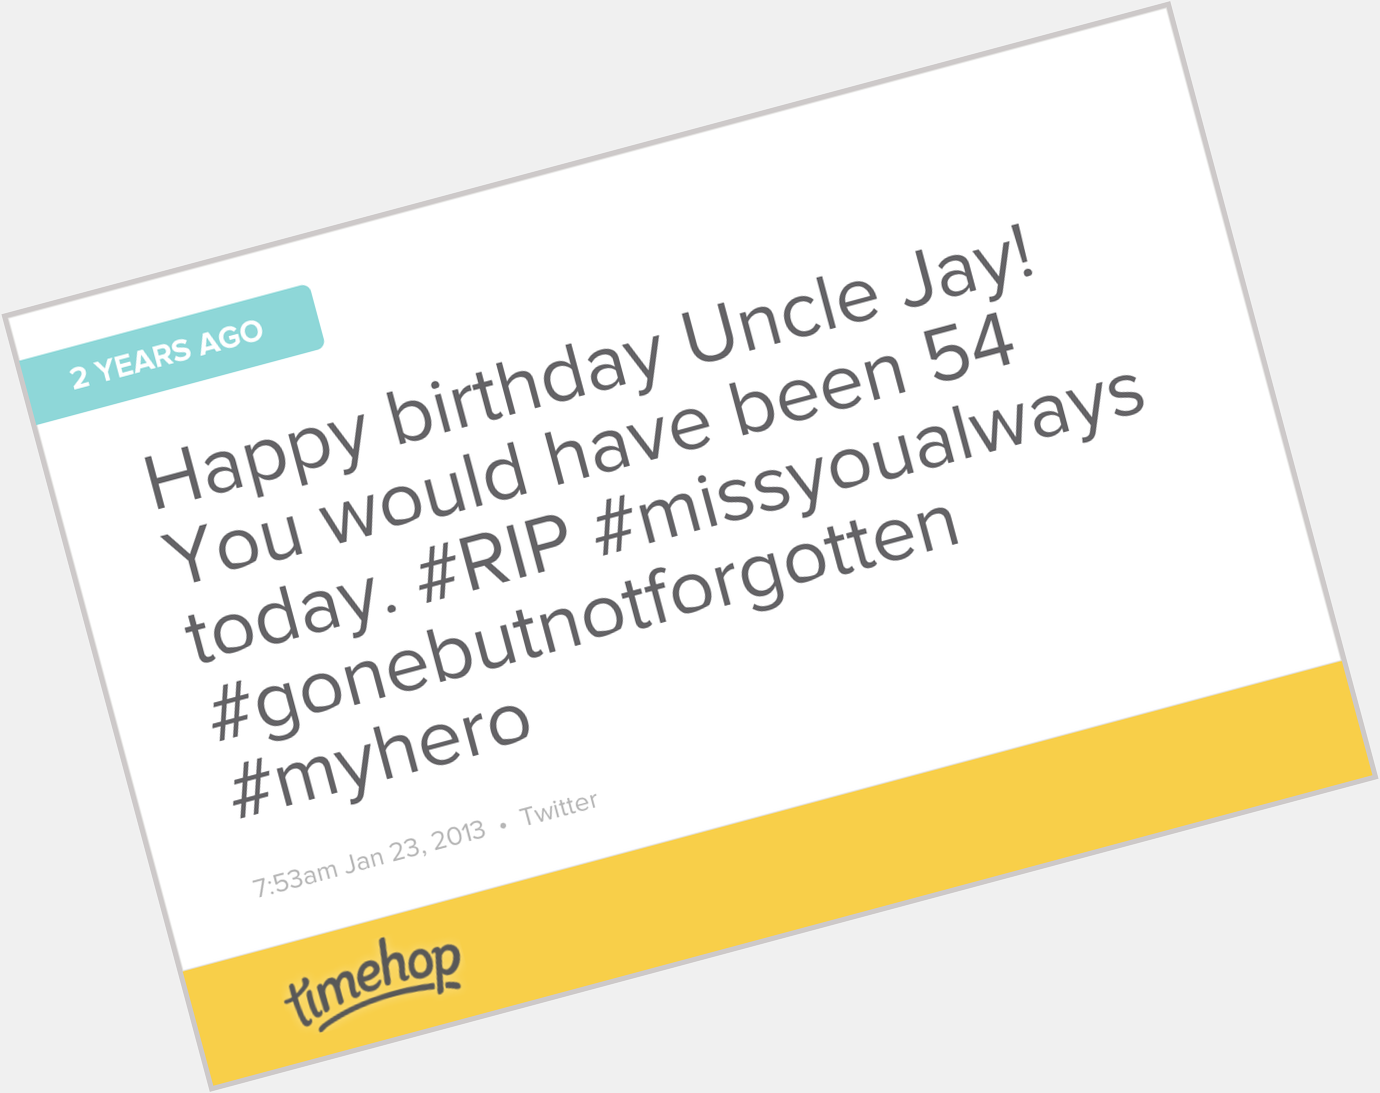 Happy birthday Uncle Jay! R.I.P. missing you always! 